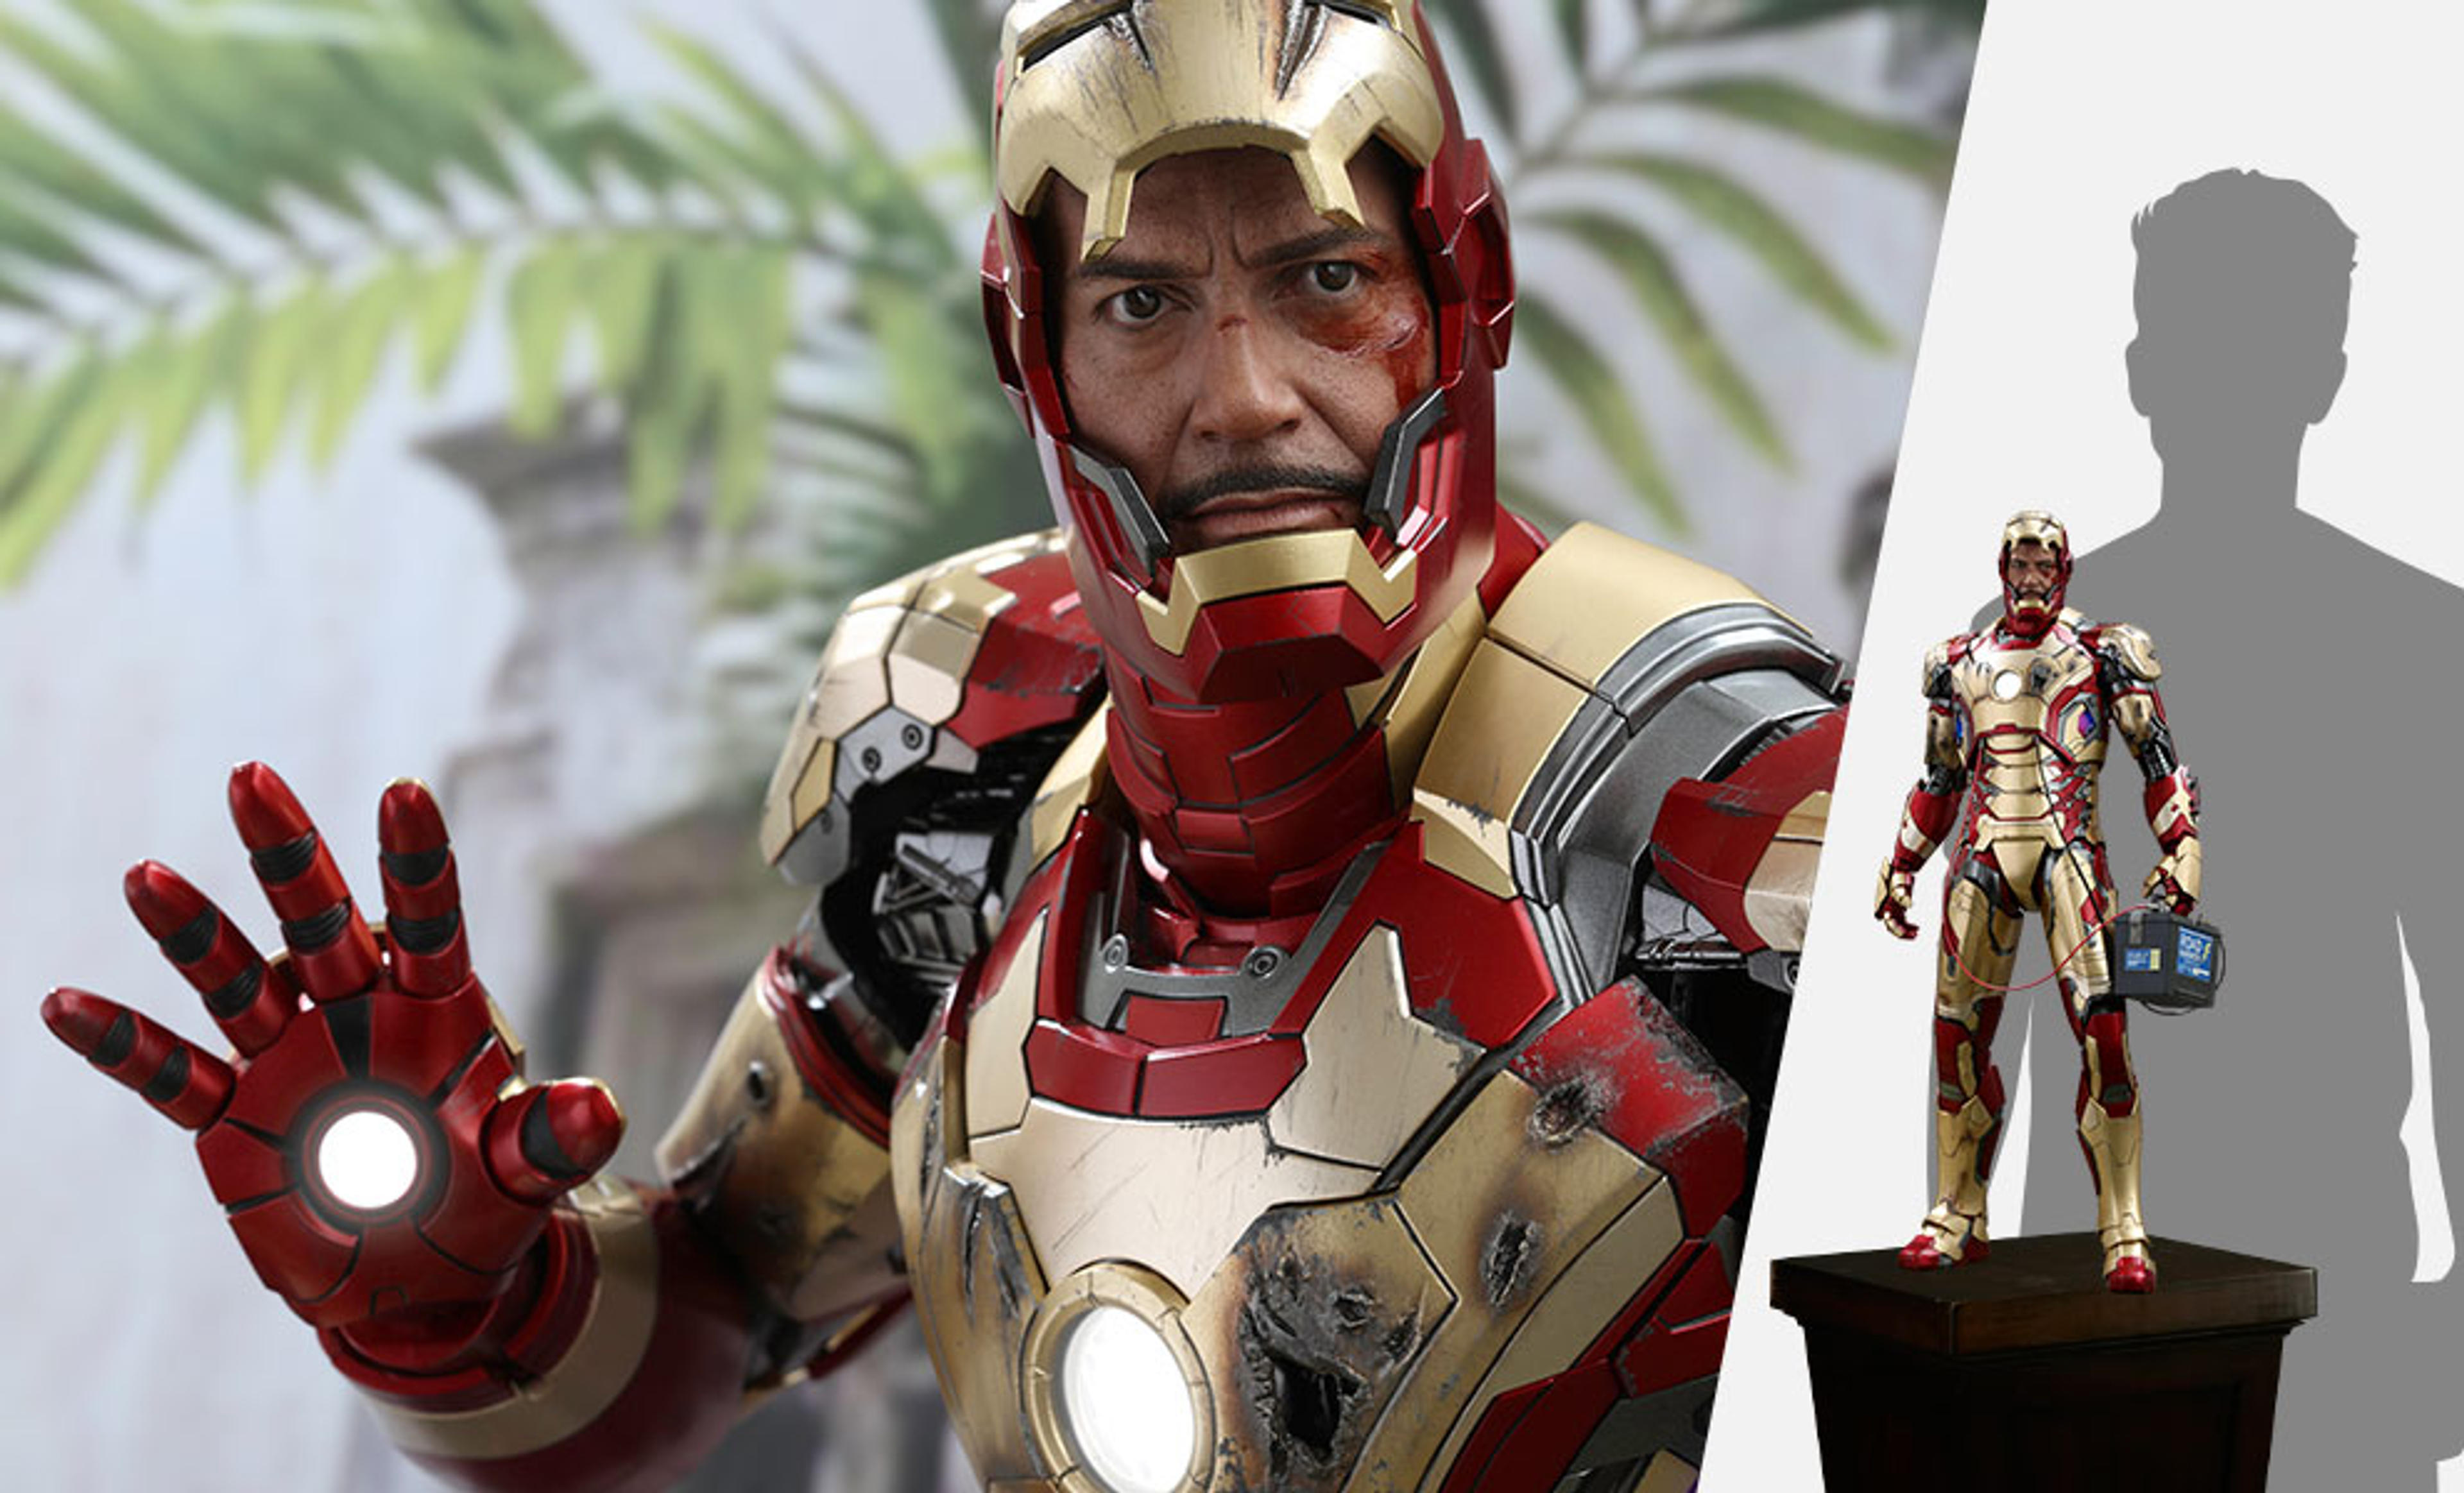 Iron Man Mark XLII (Deluxe Version) Quarter Scale Figure by Hot Toys | Sideshow Collectibles